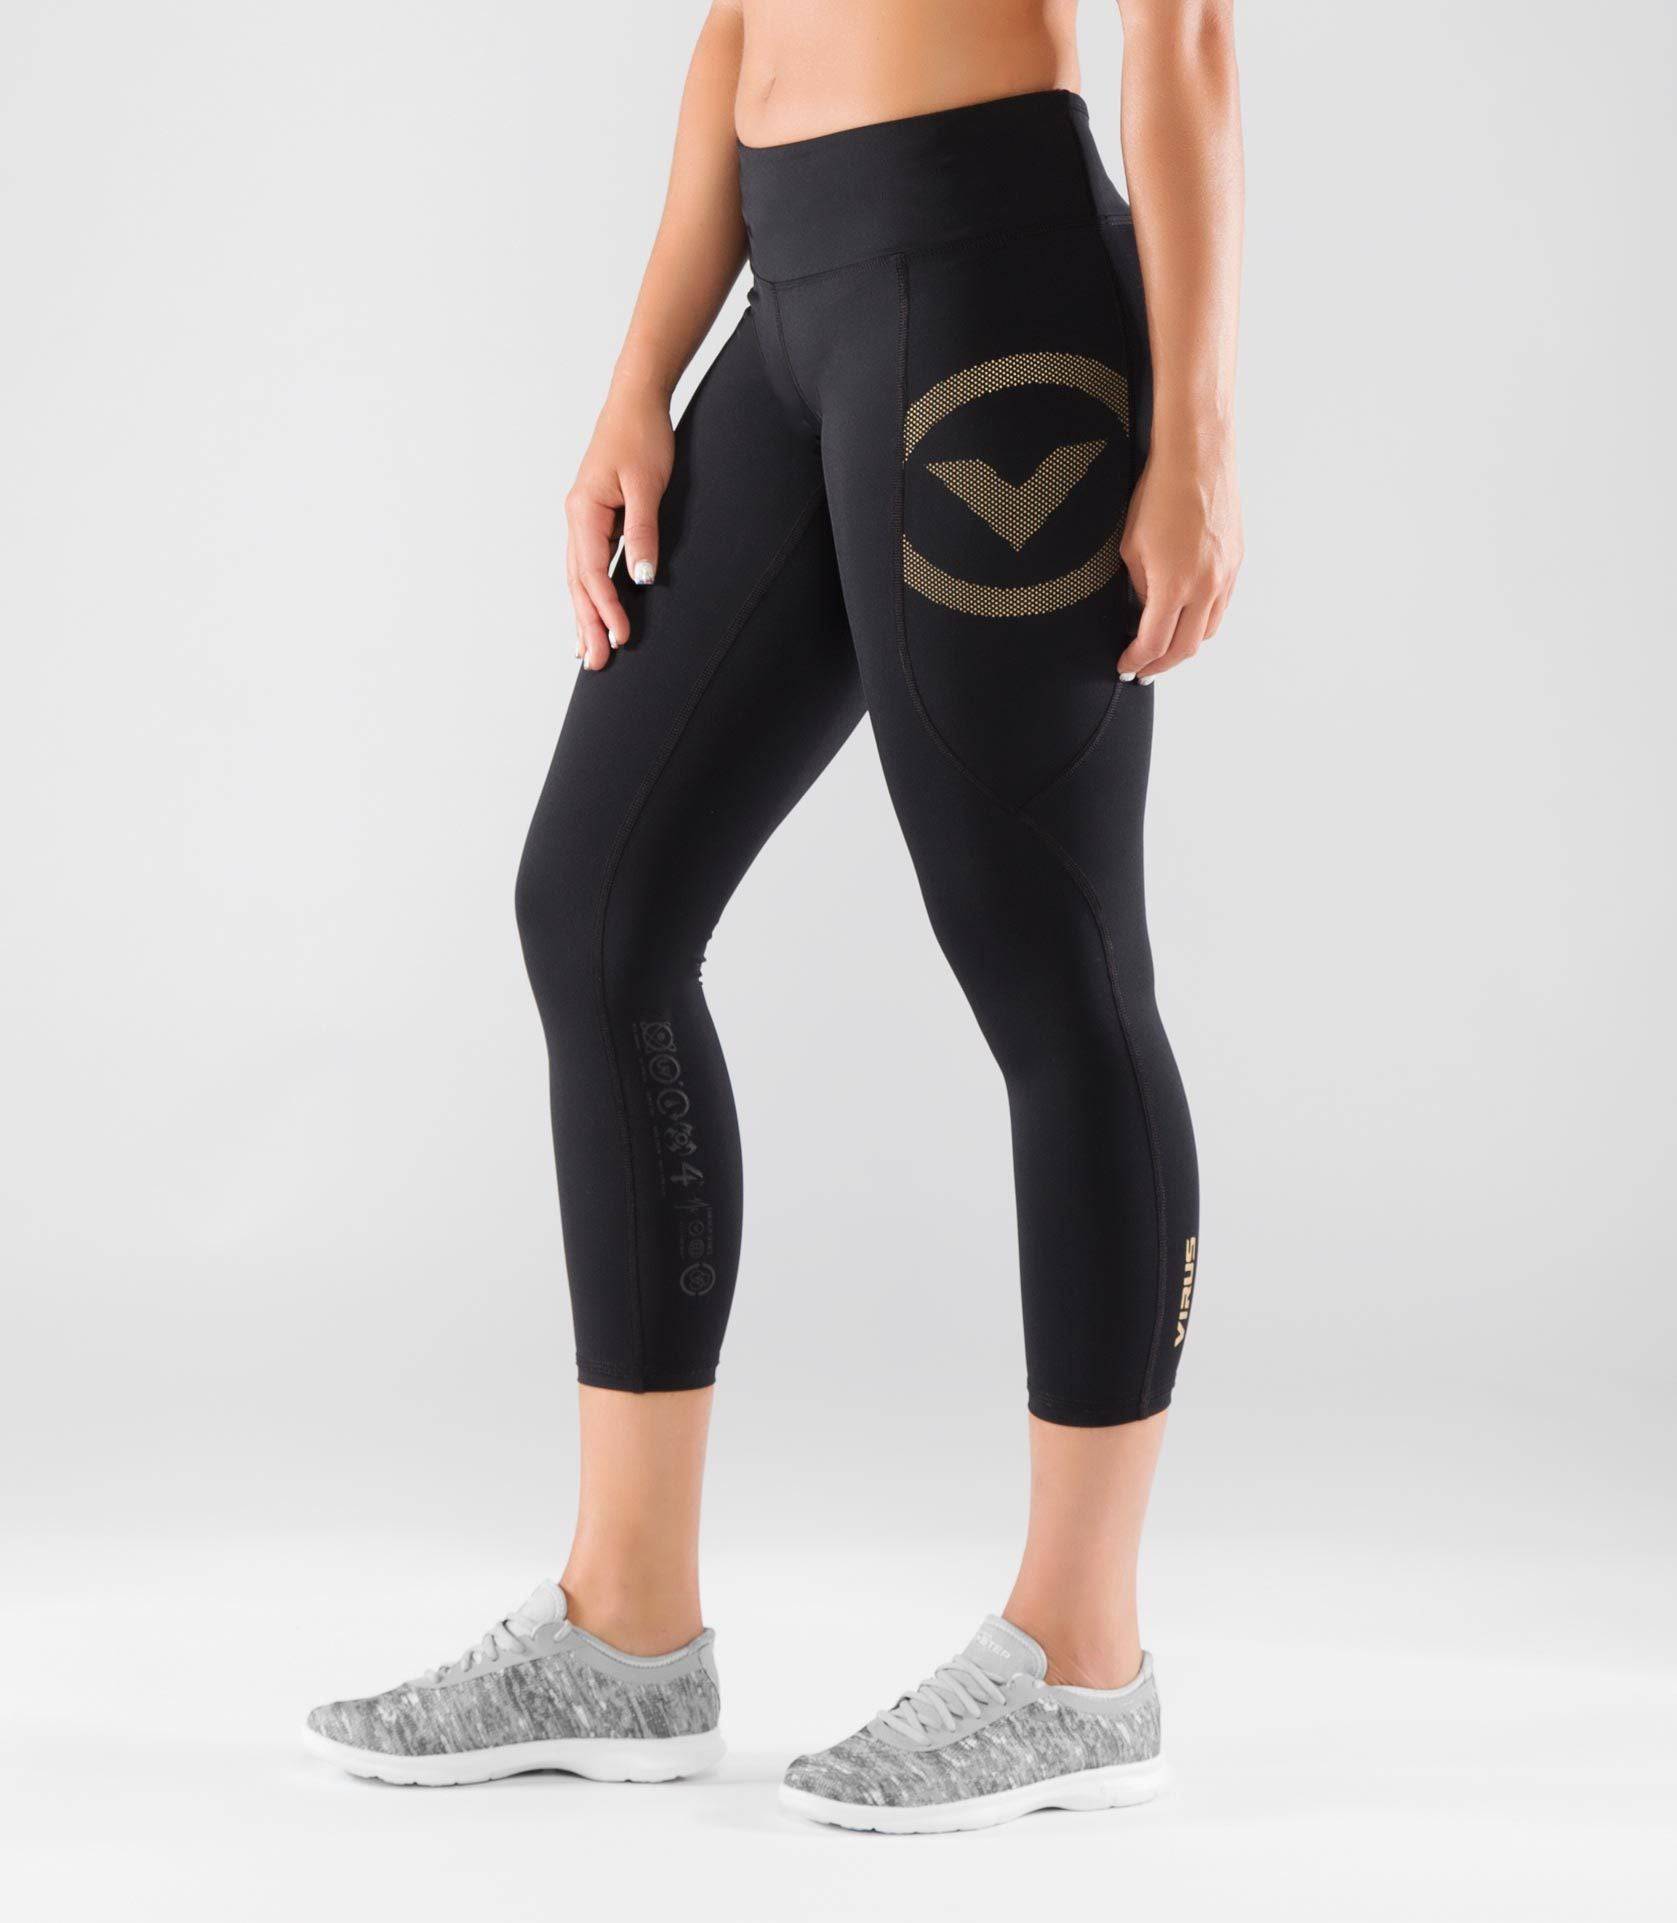 Virus, ESio50 Omega Stay Warm Compression 7/8 Length Pant